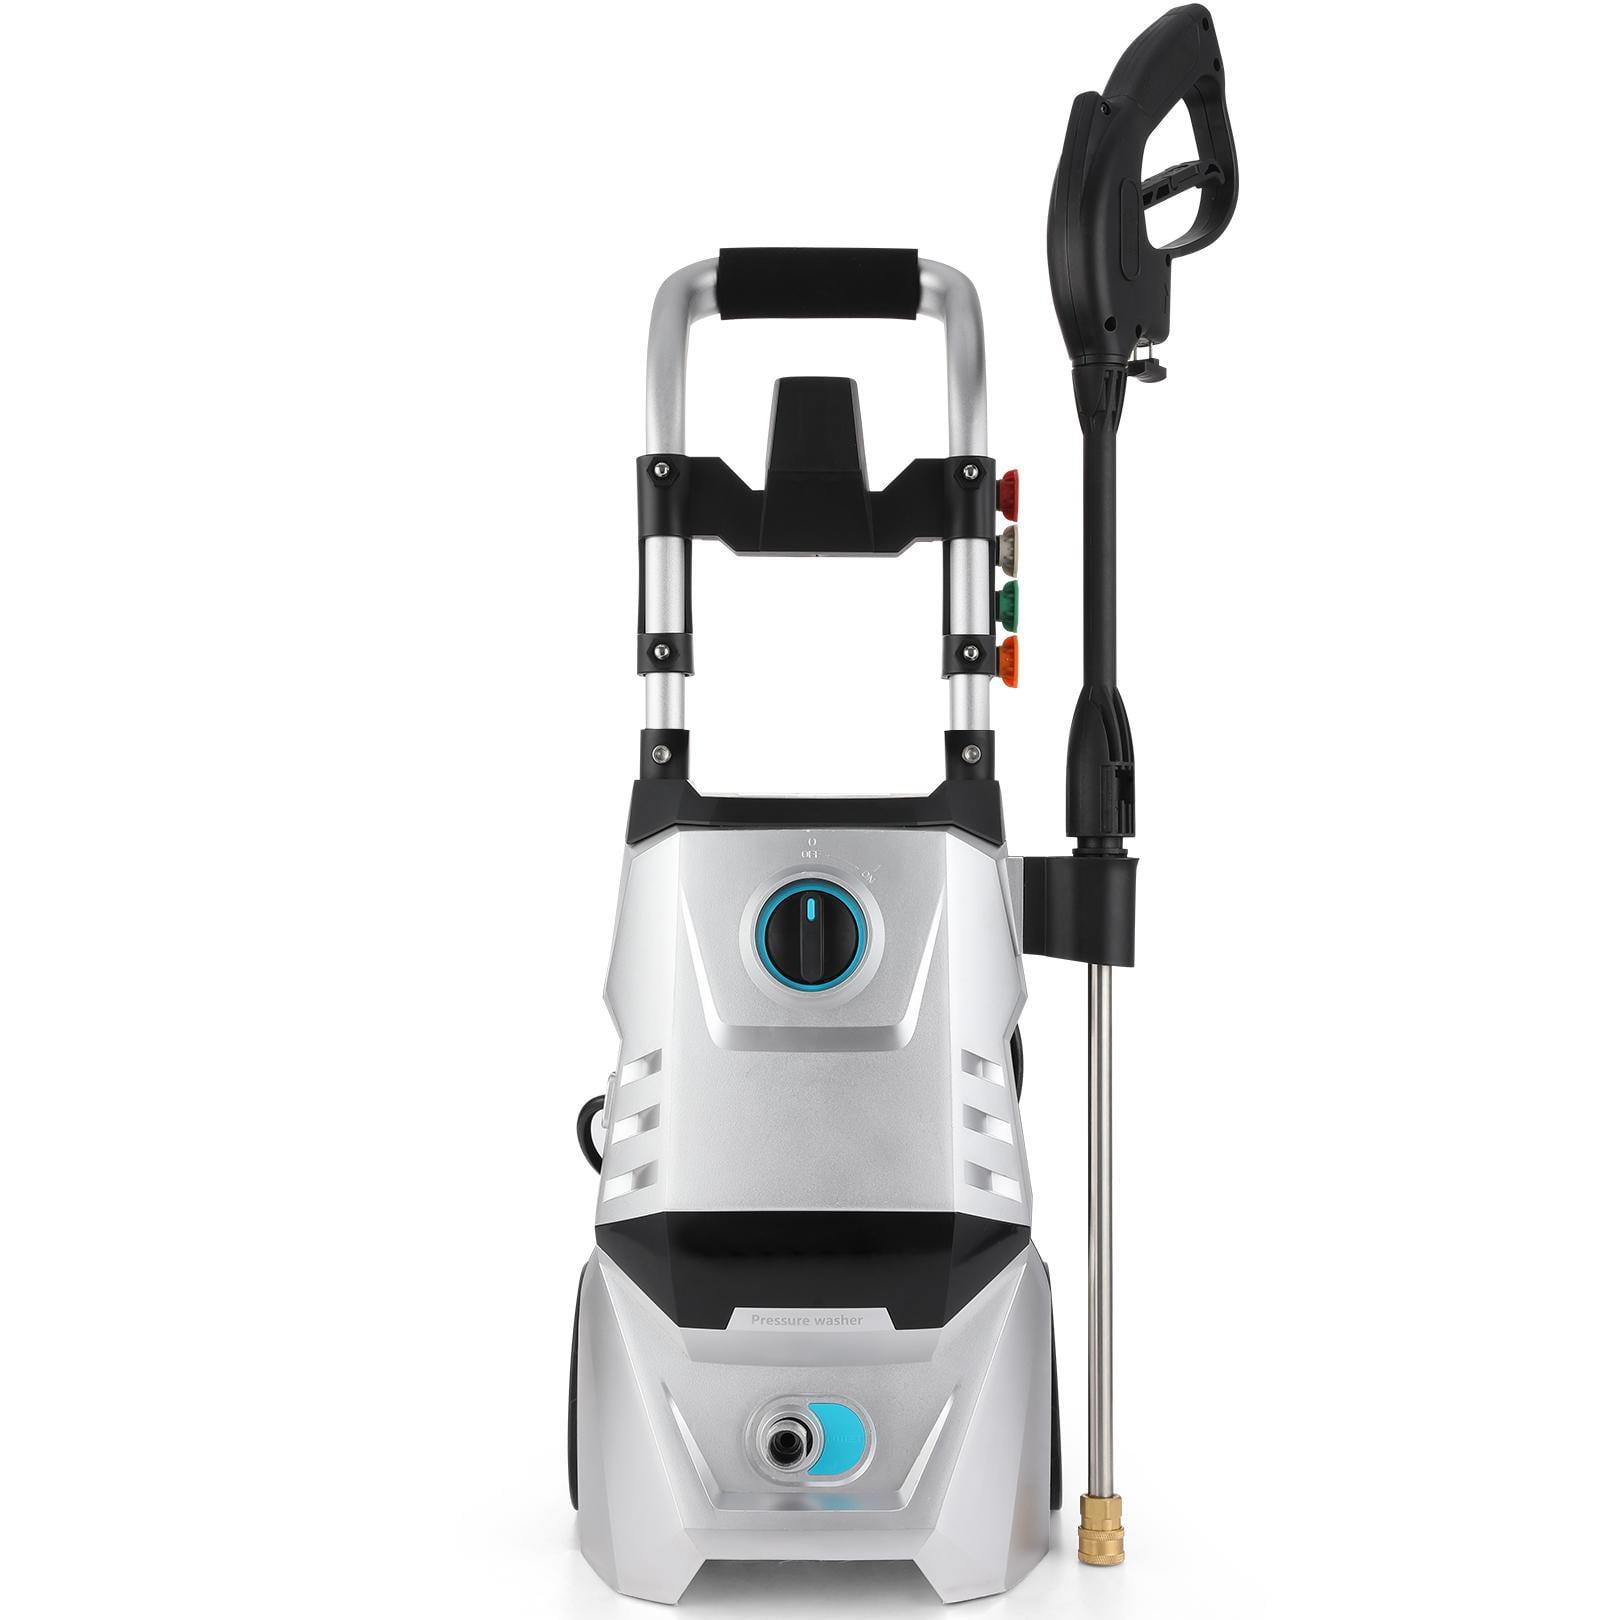 Buy AVA Evolution P70 Pressure Washer, 150 Bar 540 LPH 2400 W, High Power  Electric Jet Washer with Foam Cannon, Follow-Me Hose Reel, Zoom Lance, Used  for Patios, Cars, Includes Turbo and